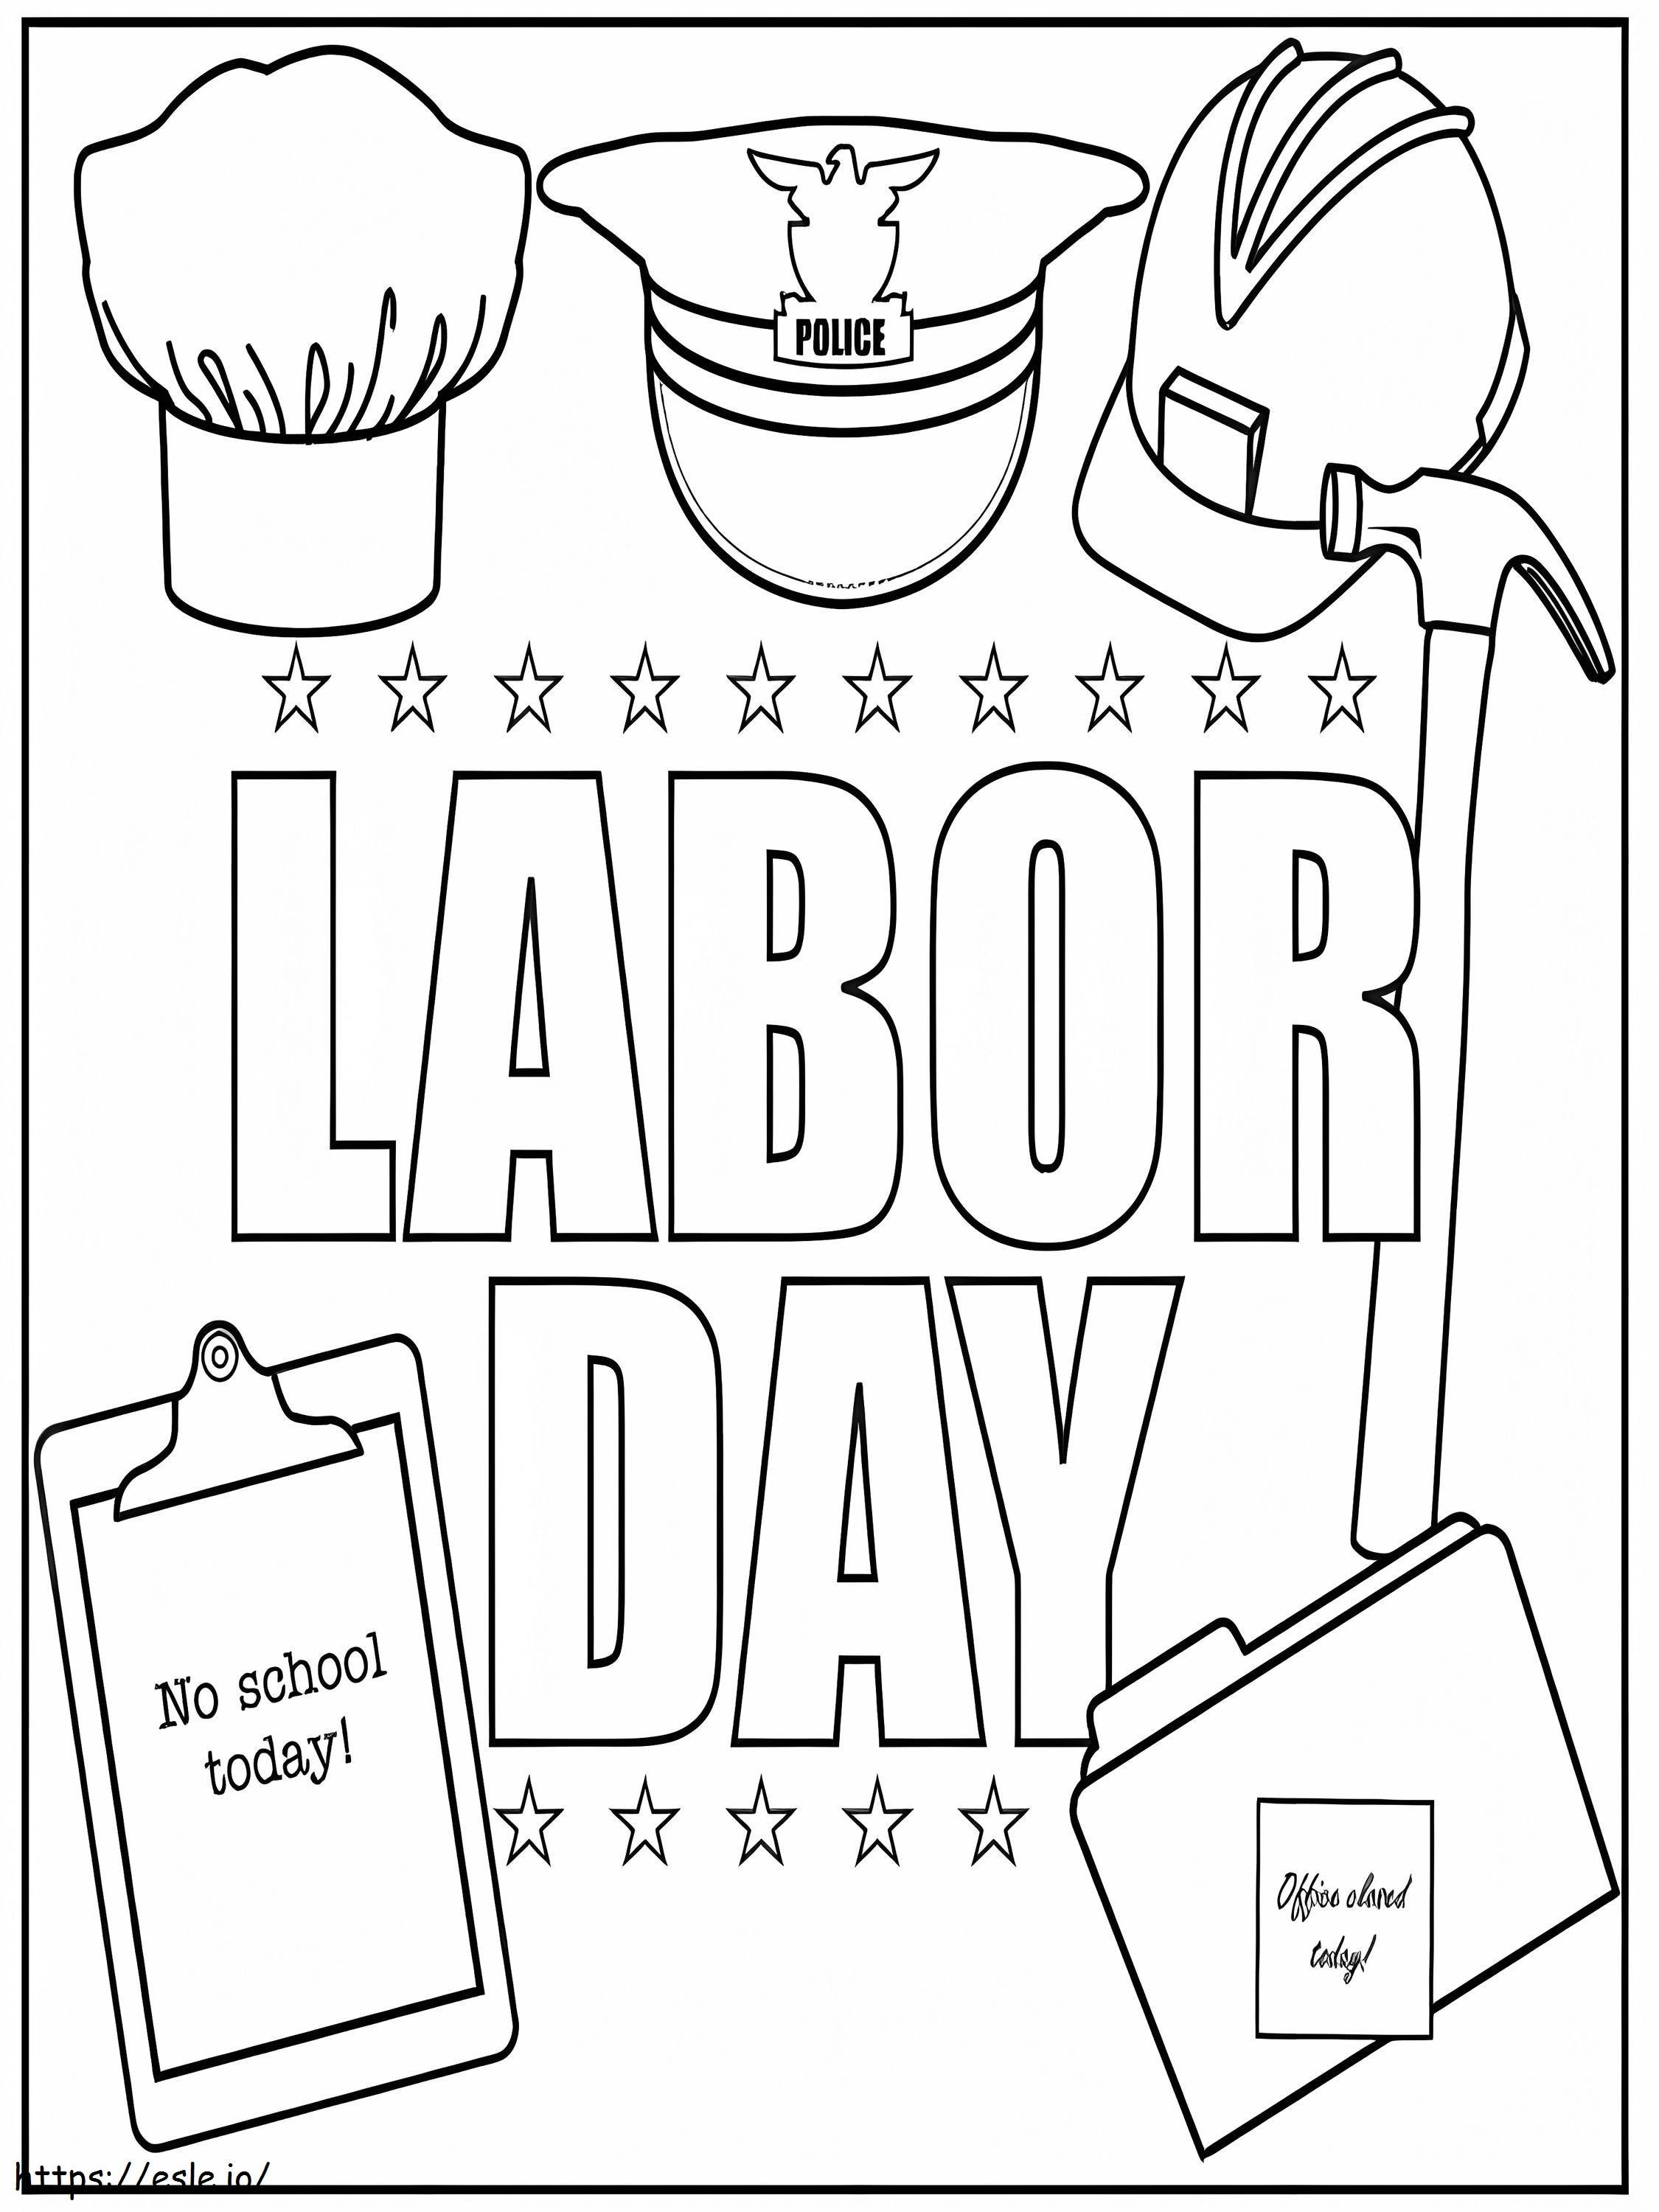 Labor Day 3 coloring page